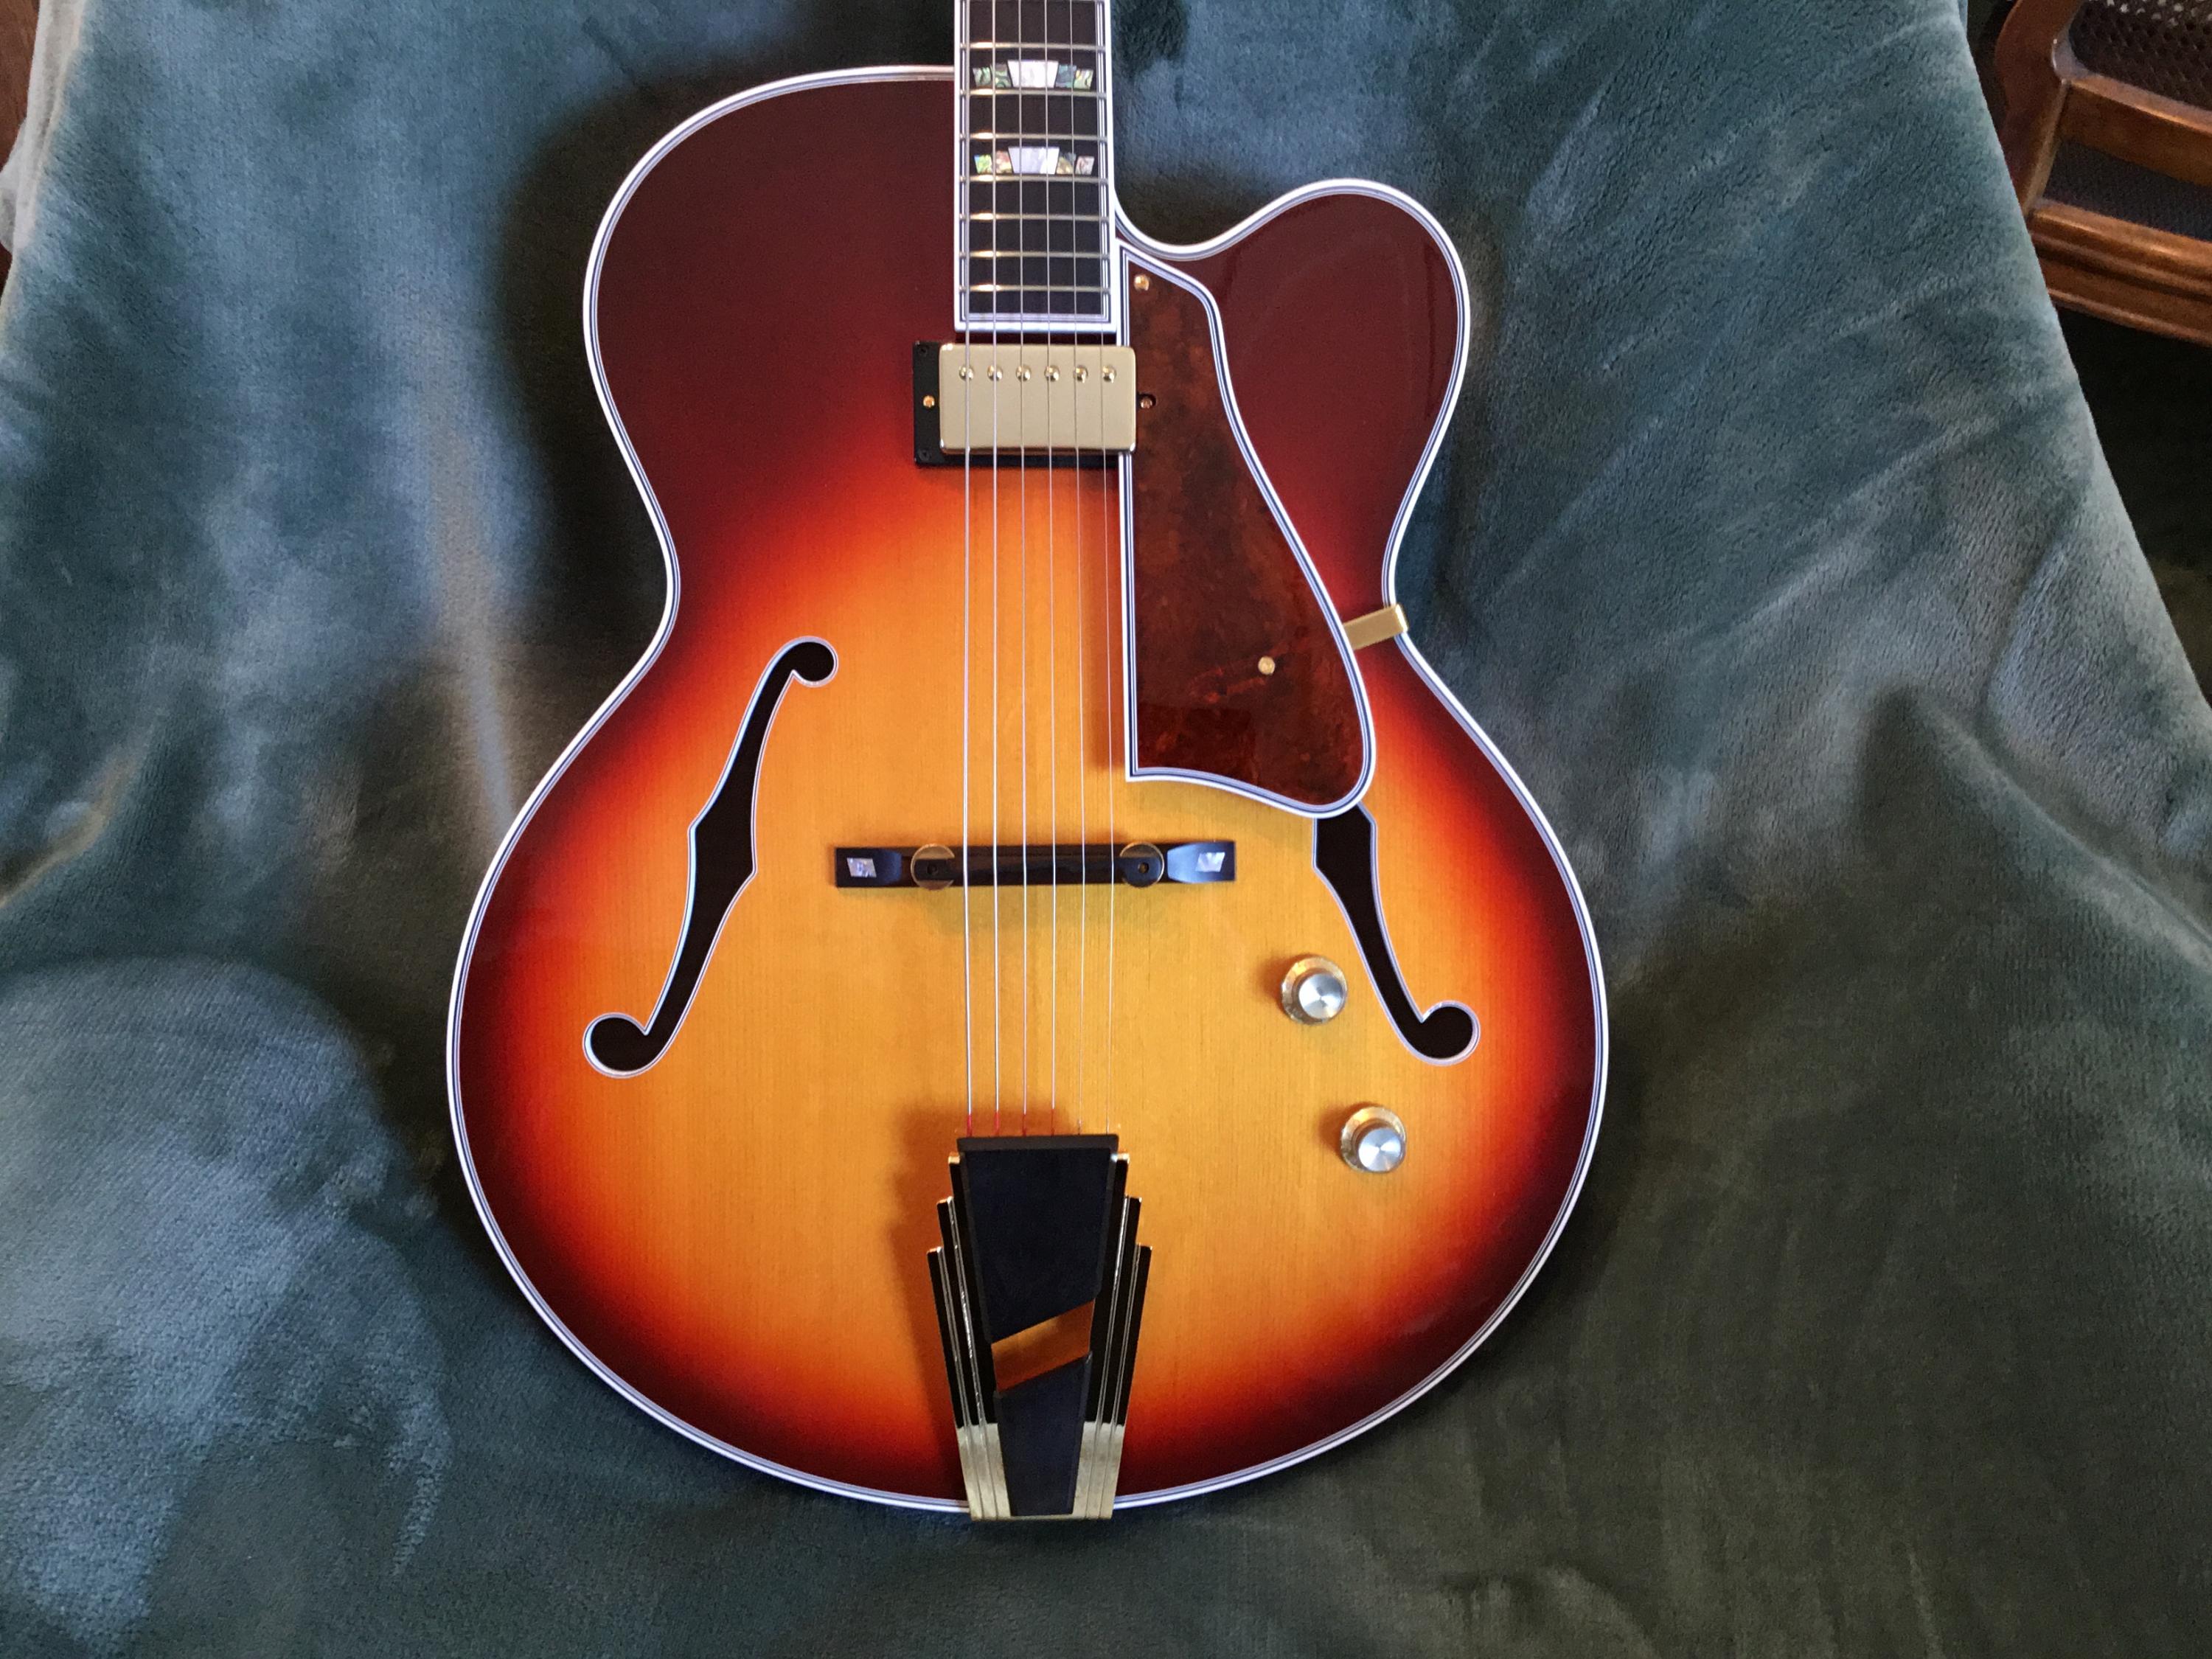 17&quot; Archtop Replacement for an L-5-ca5645ca-b830-49d1-b2f5-f775186c21b2-jpg